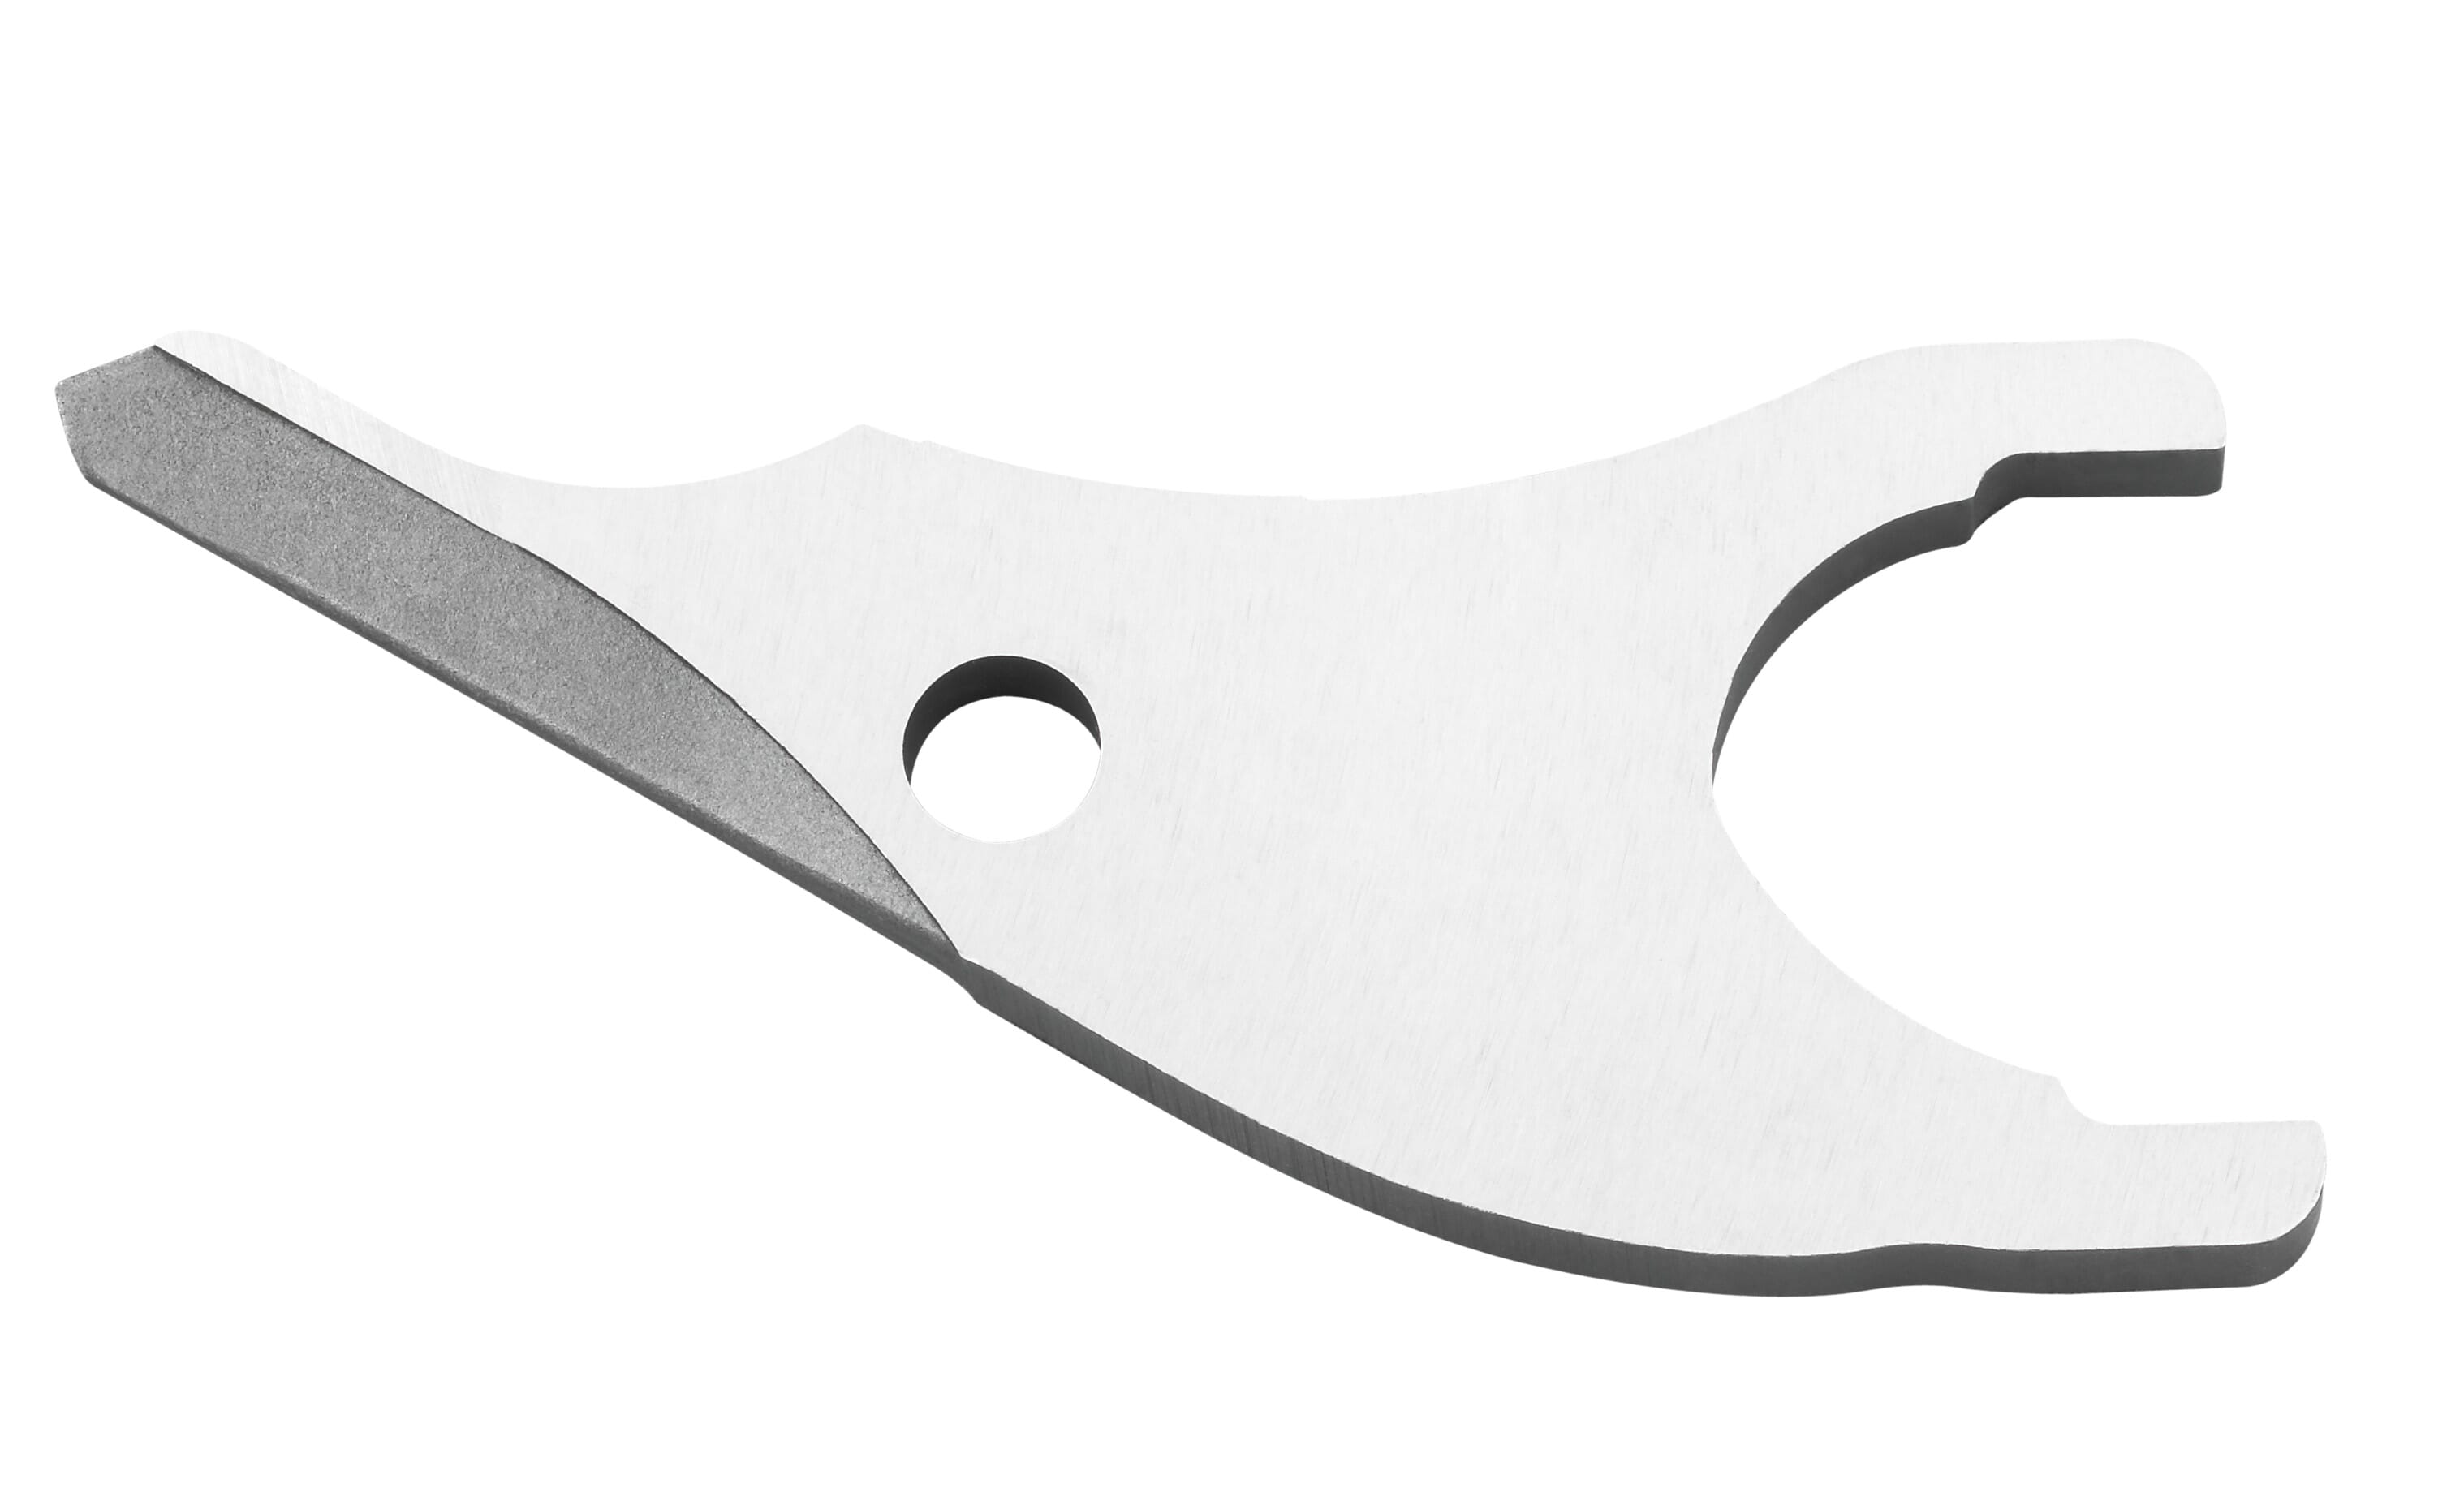 Milwaukee; 48-44-0160 Left Shear Blade, For Use With Milwaukee 6850 and 6852-20, 3.89 in Blade Length 1/4 in Blade THK | Milwaukee Electric Tool 48-44-0160 MIL148-44-0160